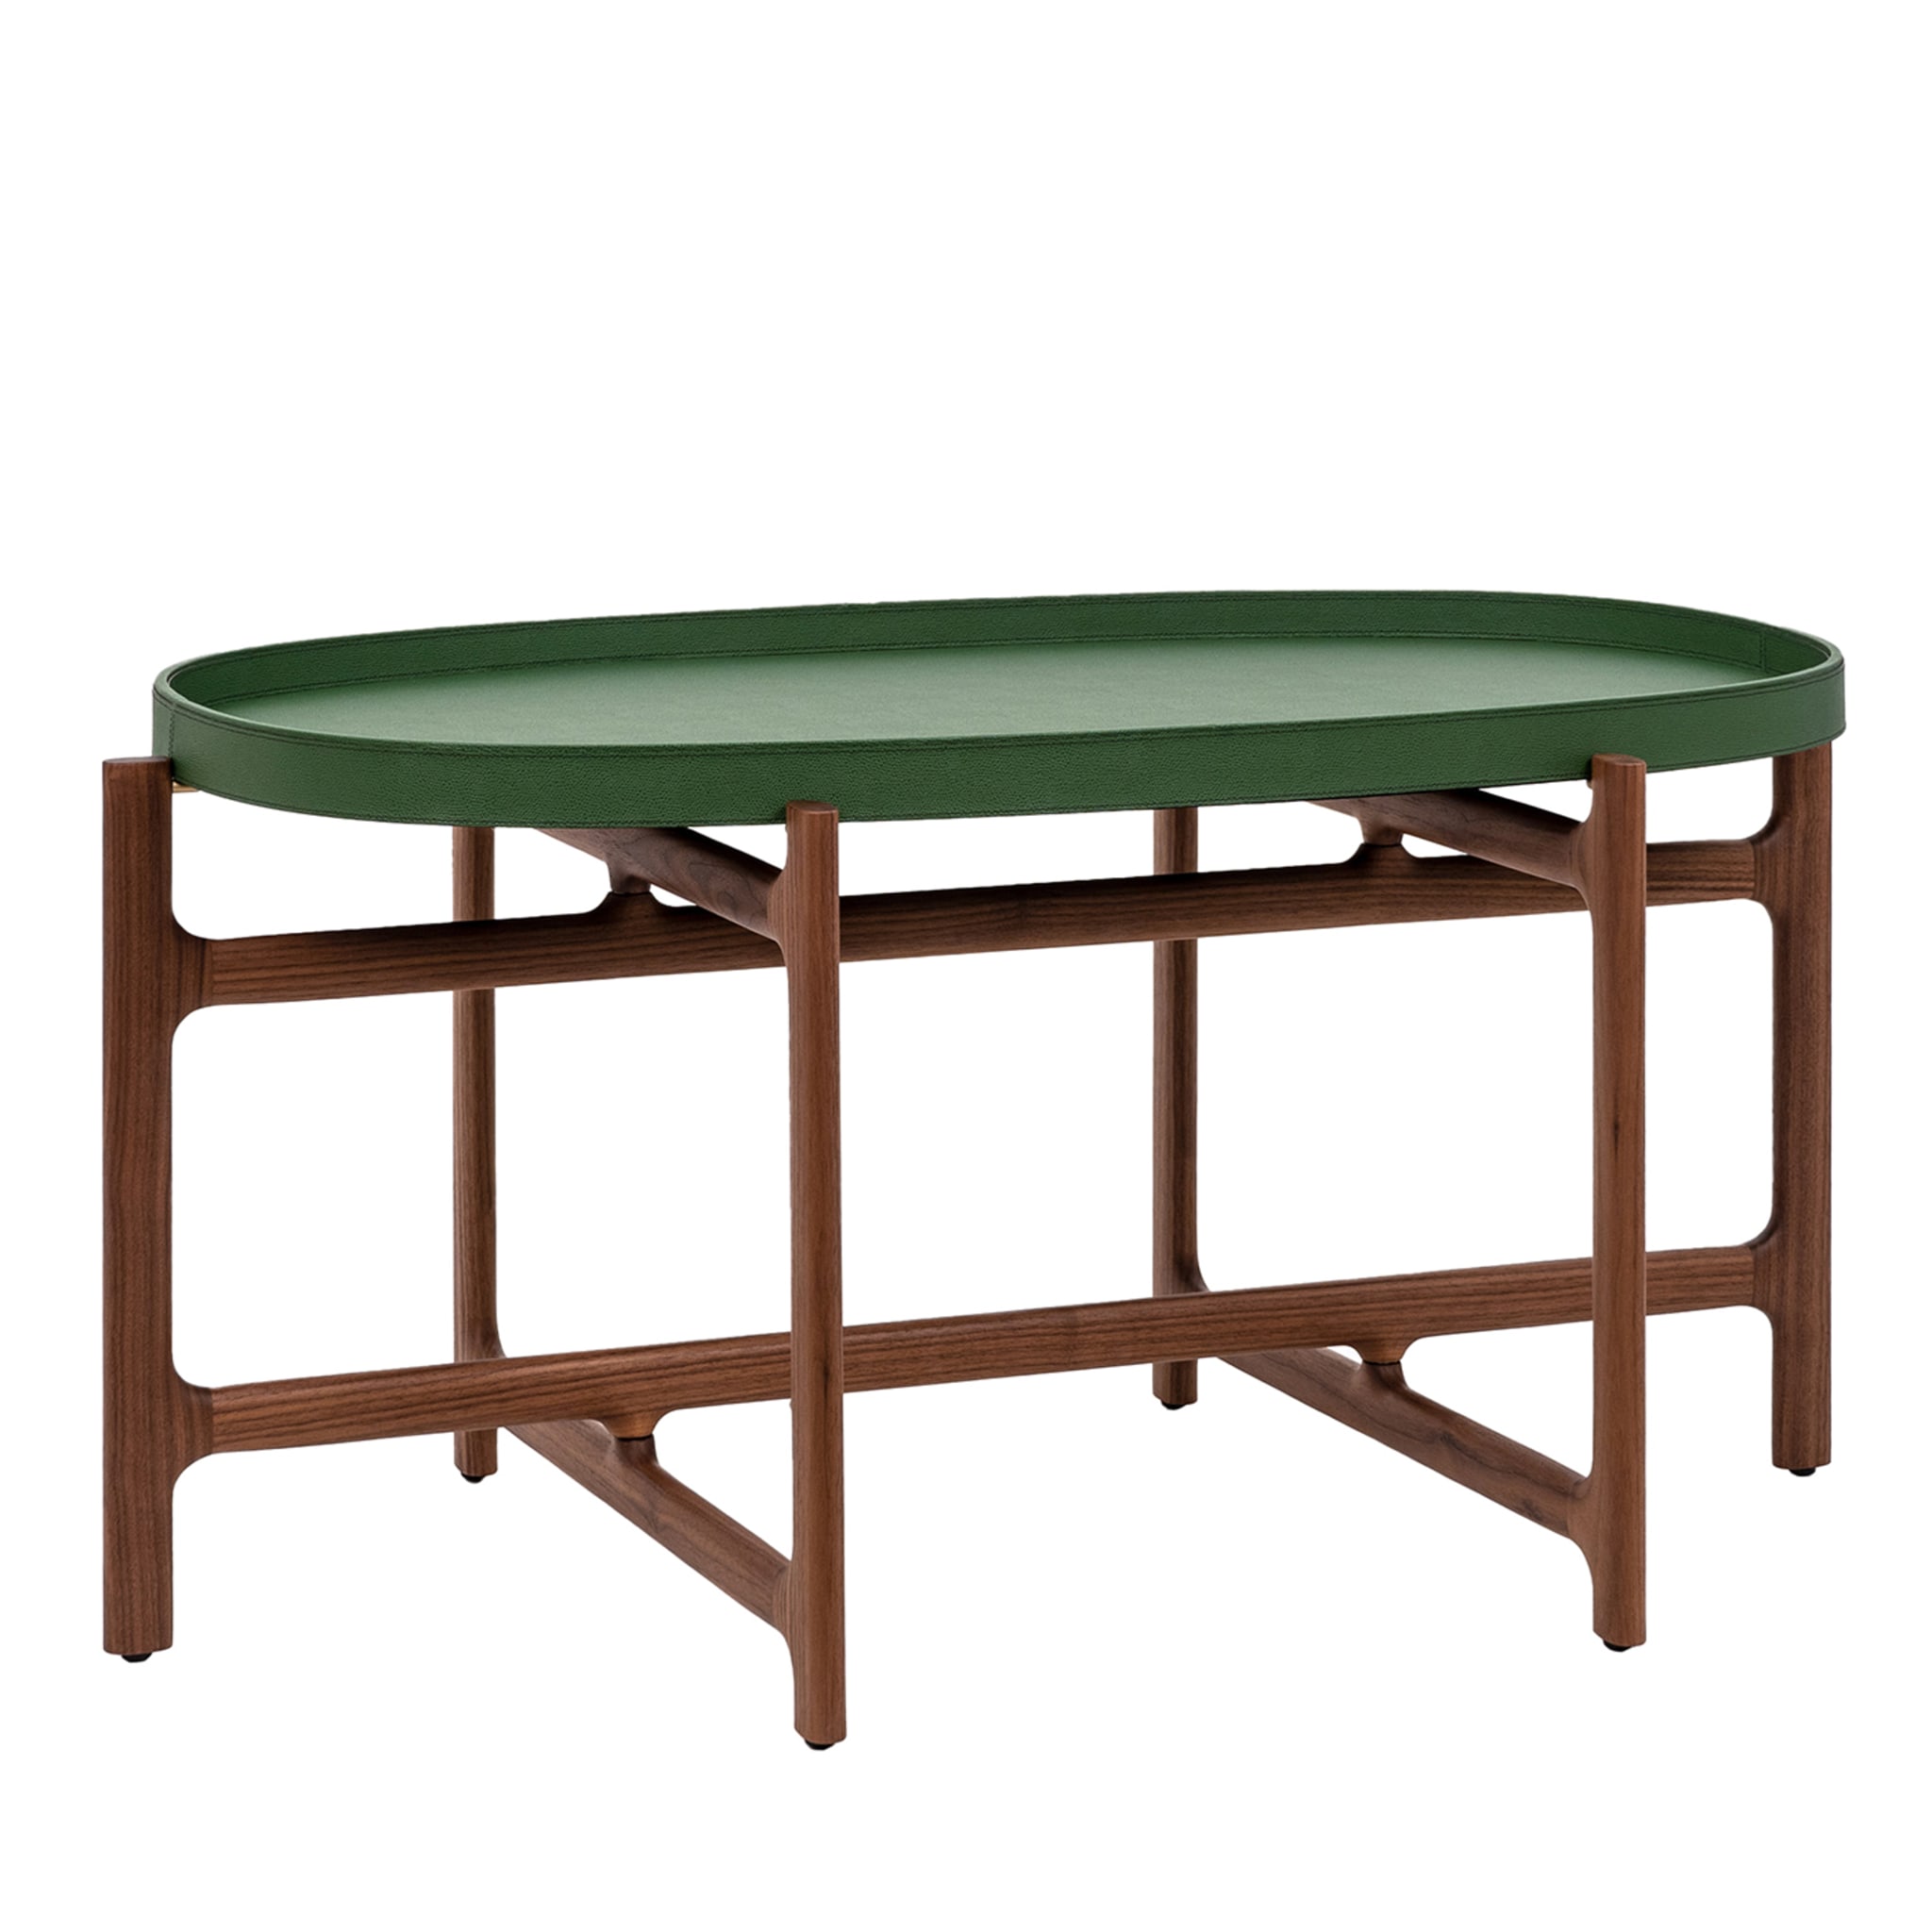 Chelsea Large Green Folding Table - Main view